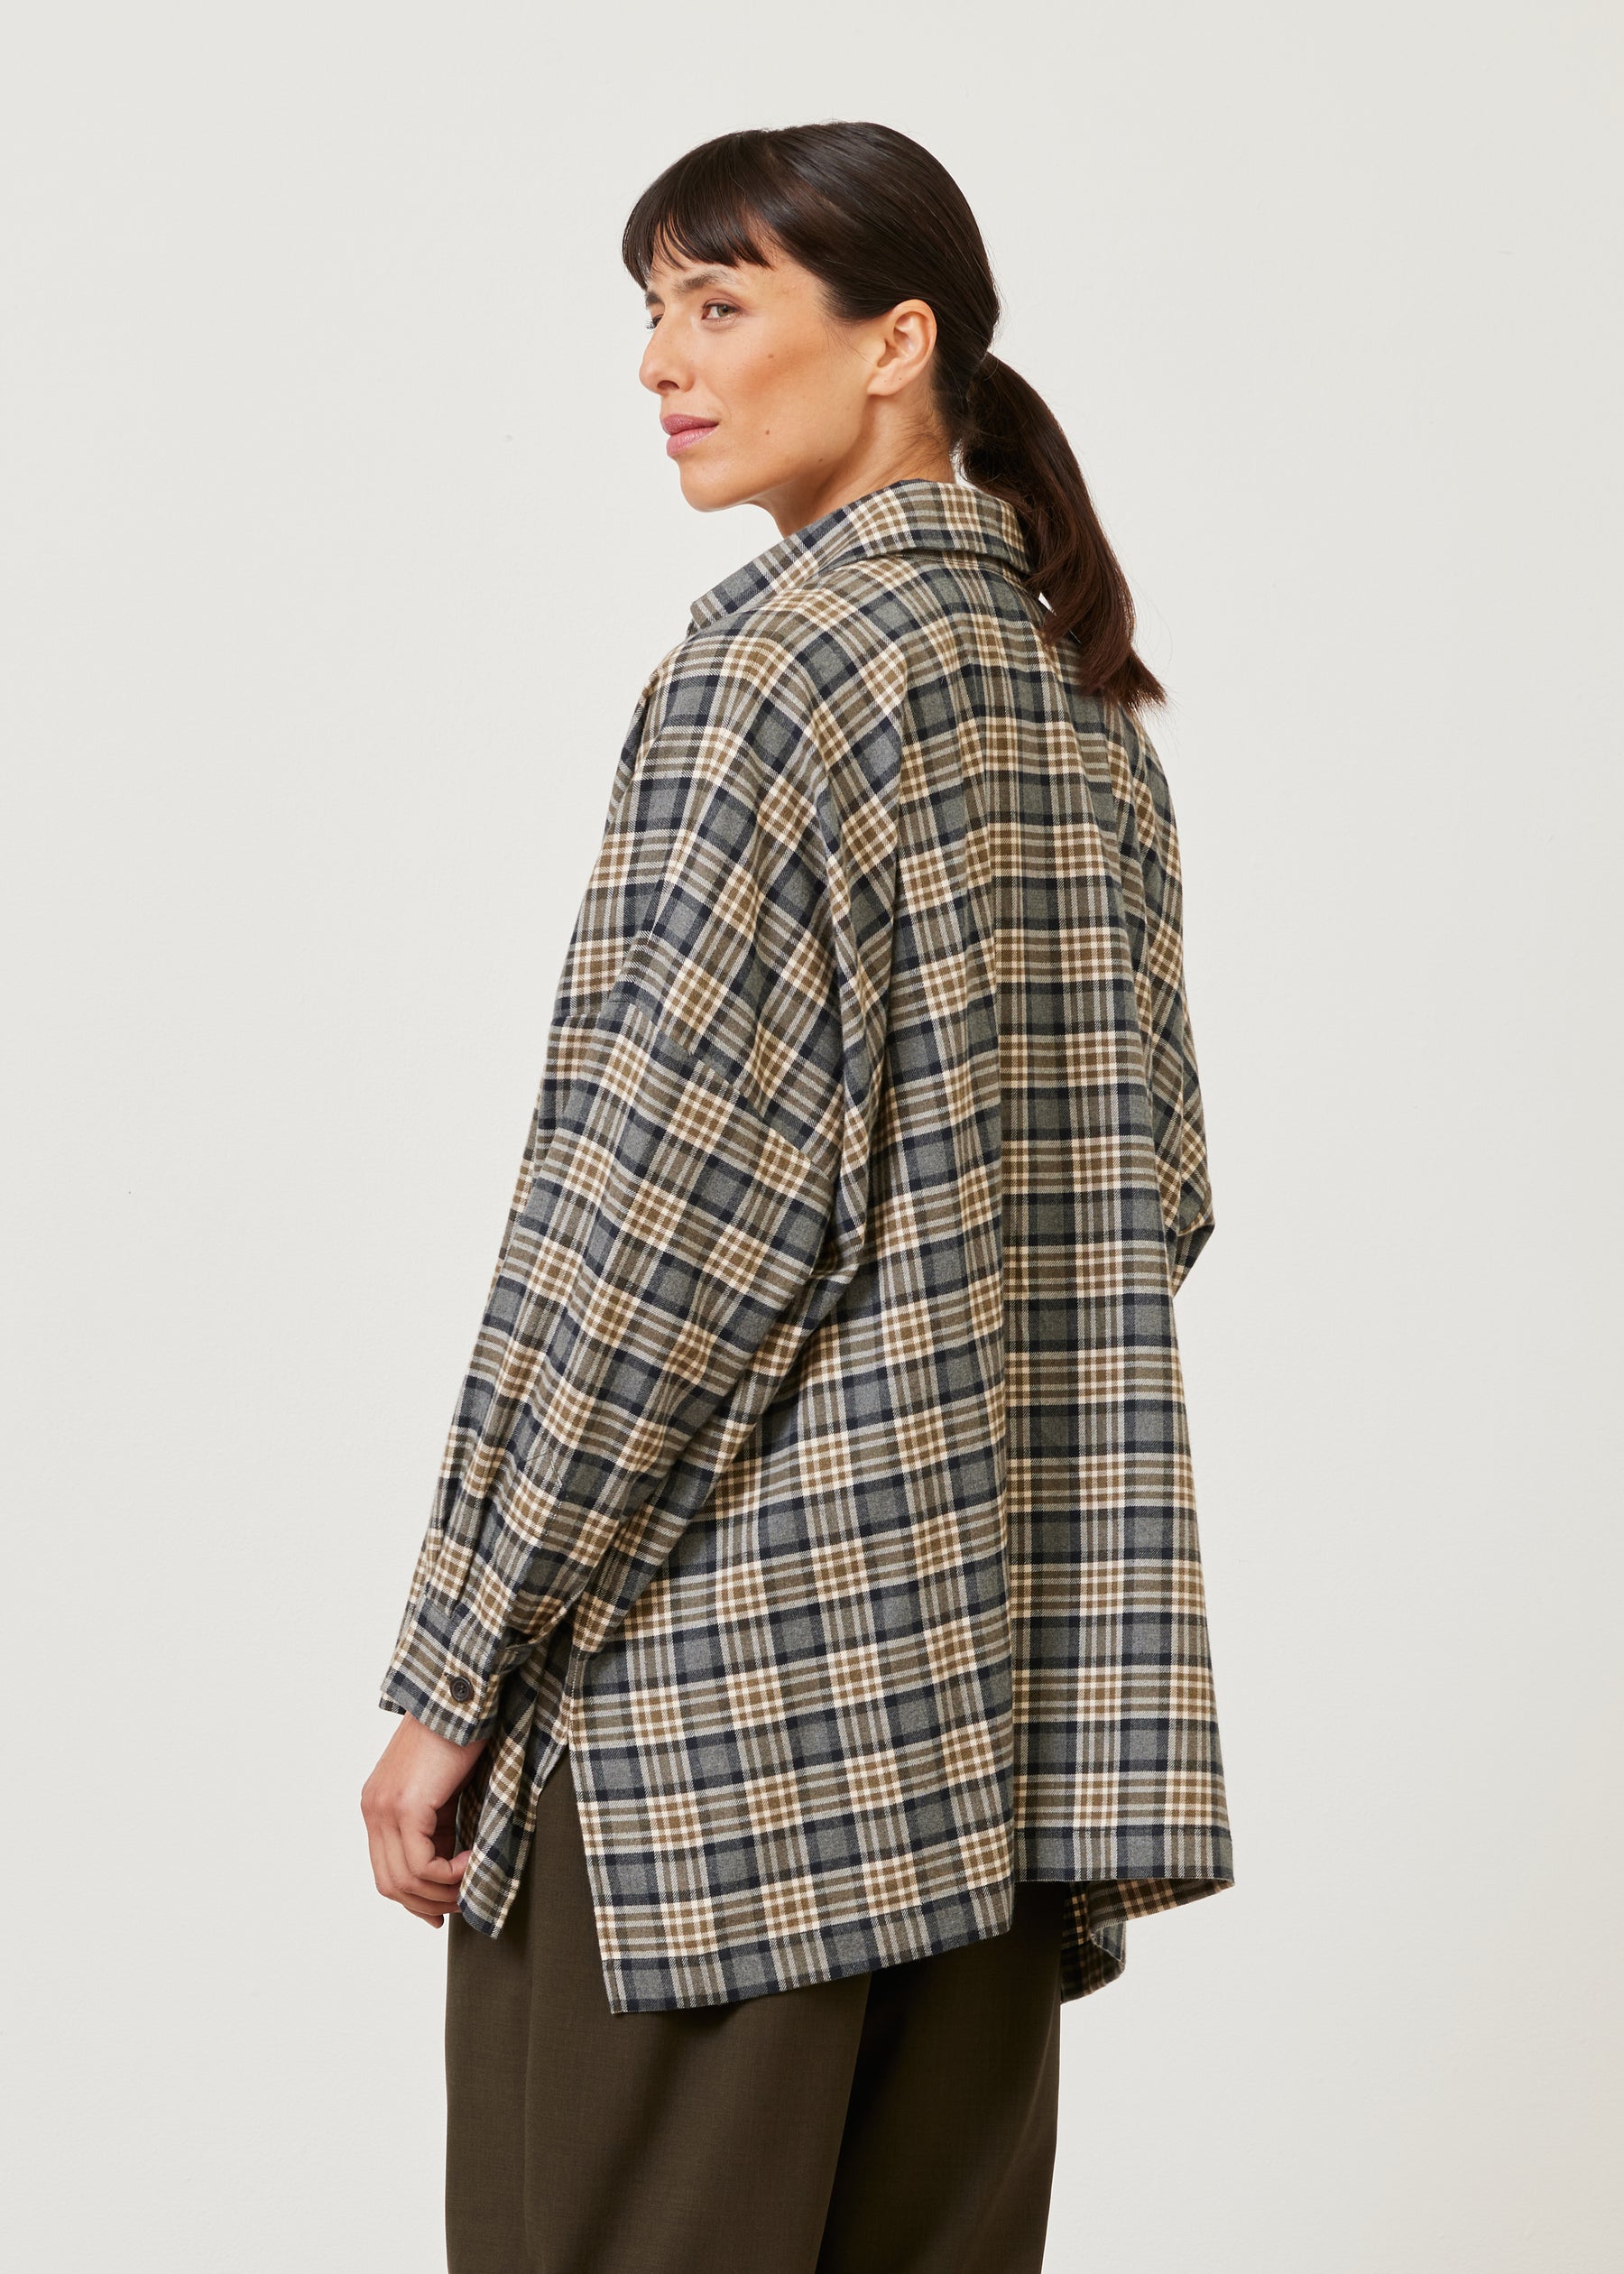 wide longer back shirt jacket with collar - long